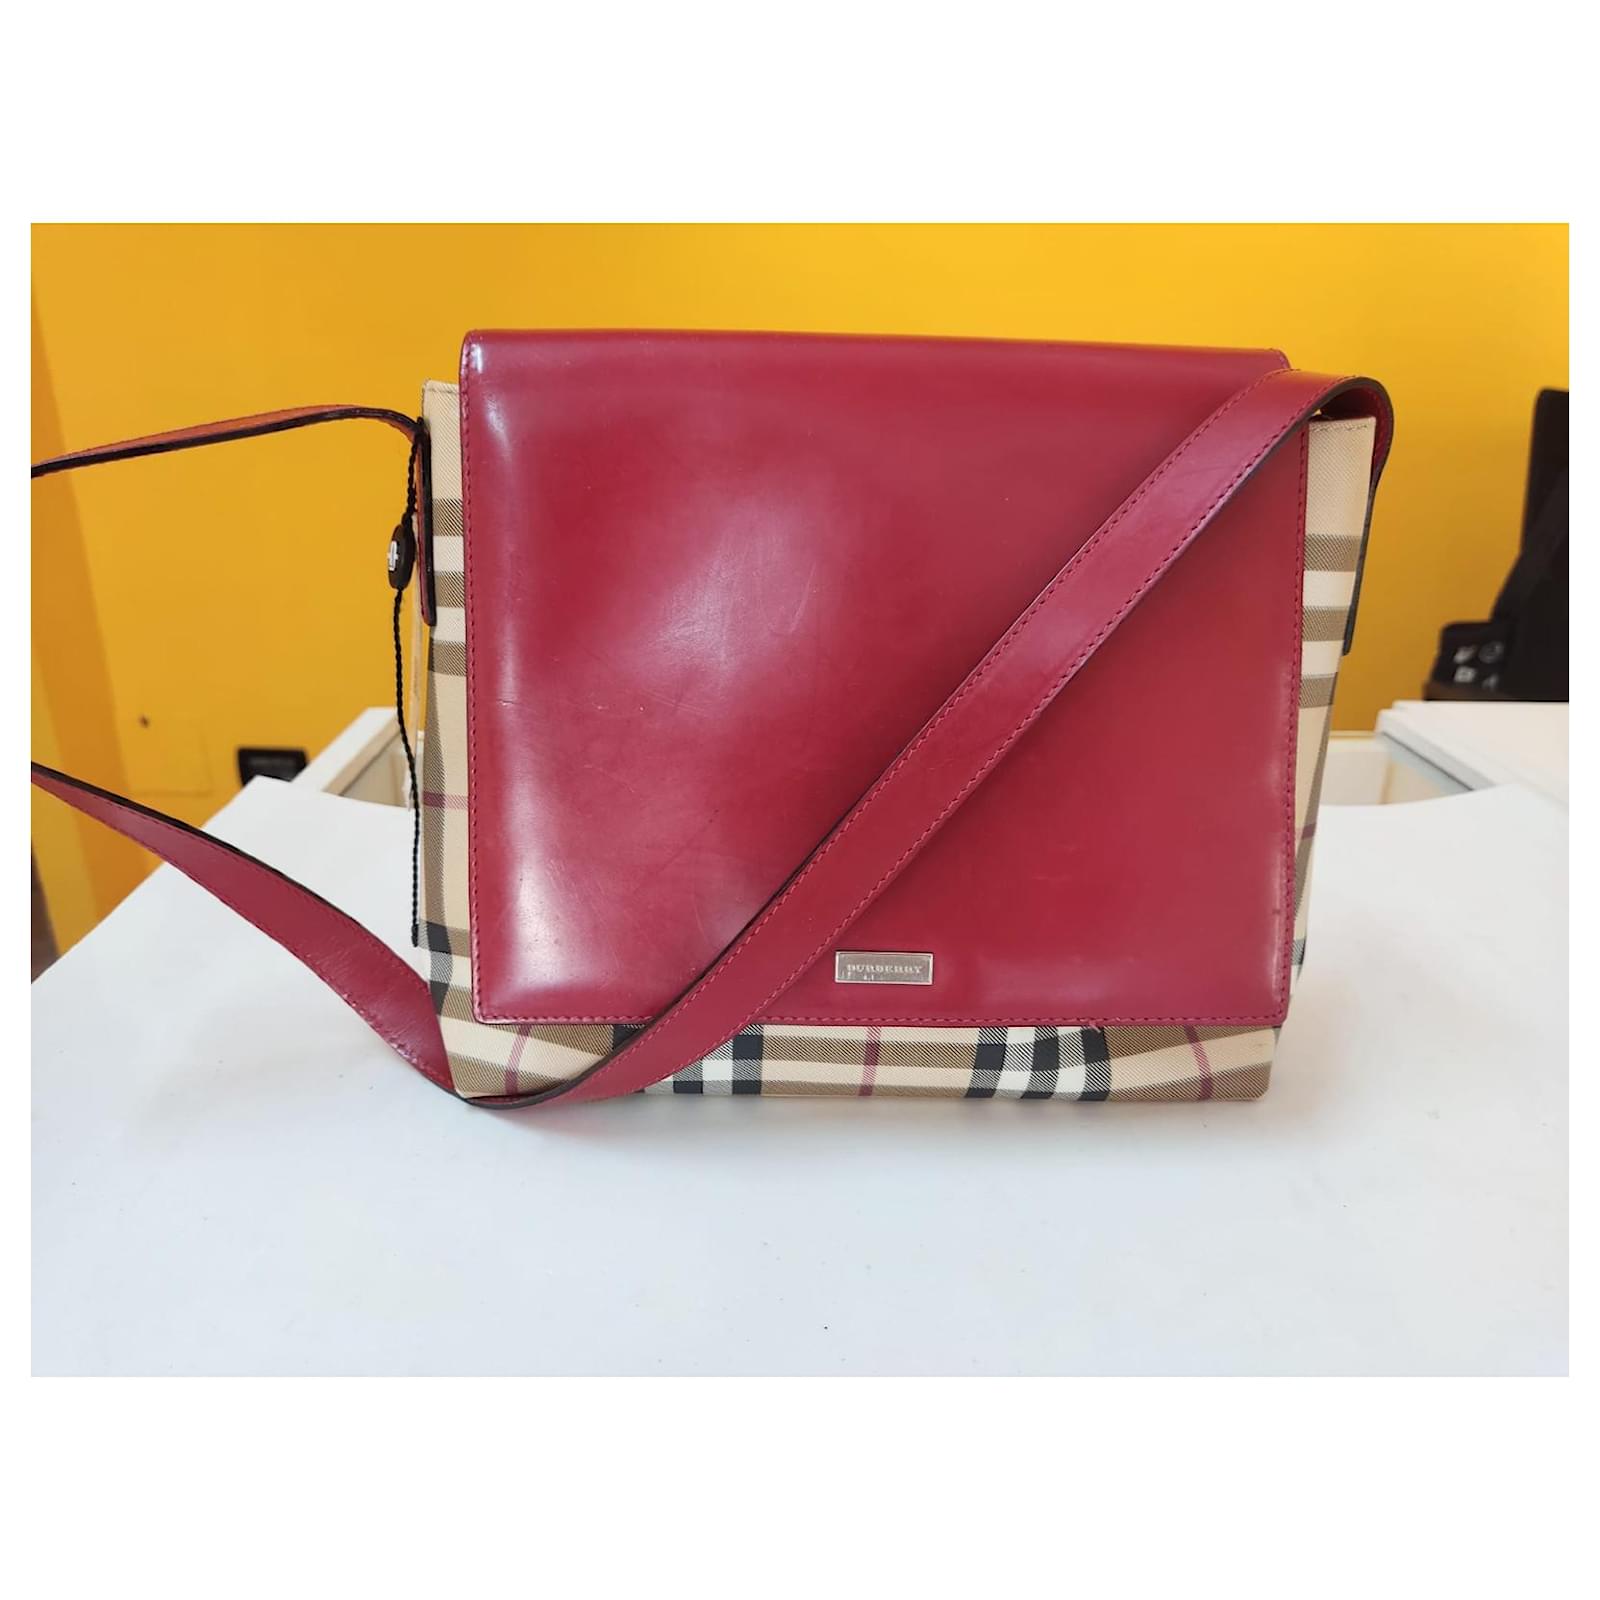 Burberry Classic Shoulder Bags for Women